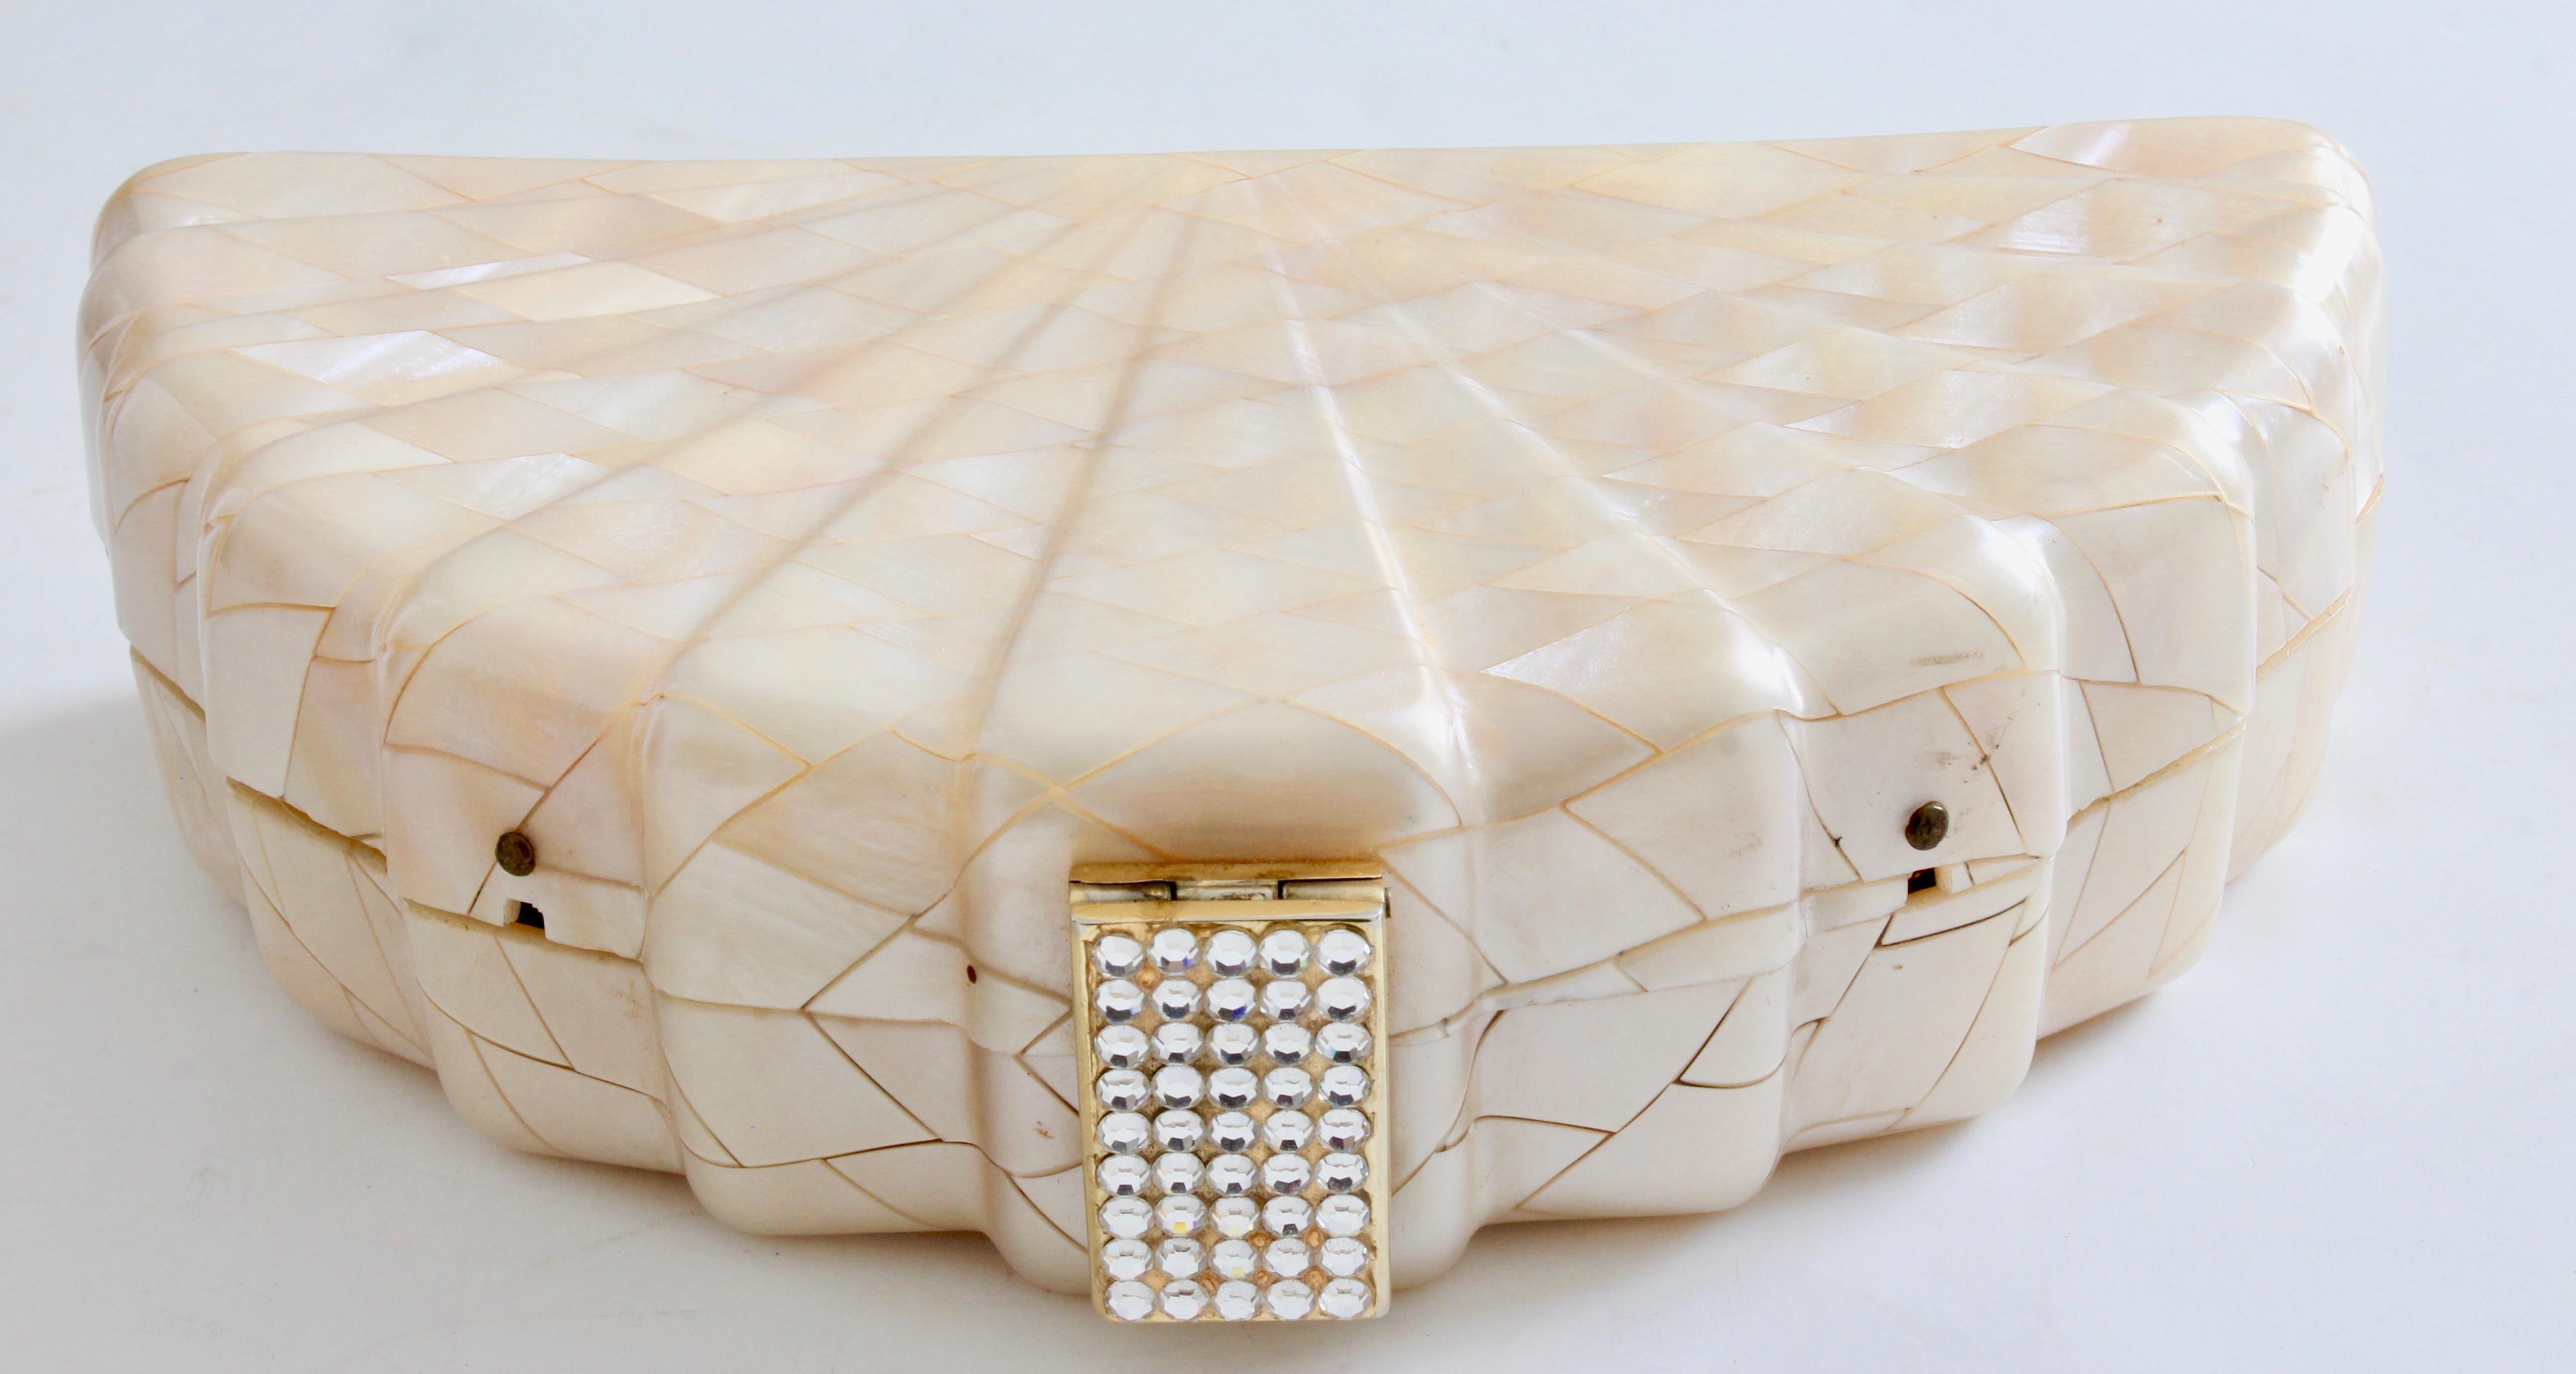 Rare Saks Fifth Avenue Mosaic Clutch Evening Bag with Rhinestone Accents  1960s In Good Condition For Sale In Port Saint Lucie, FL